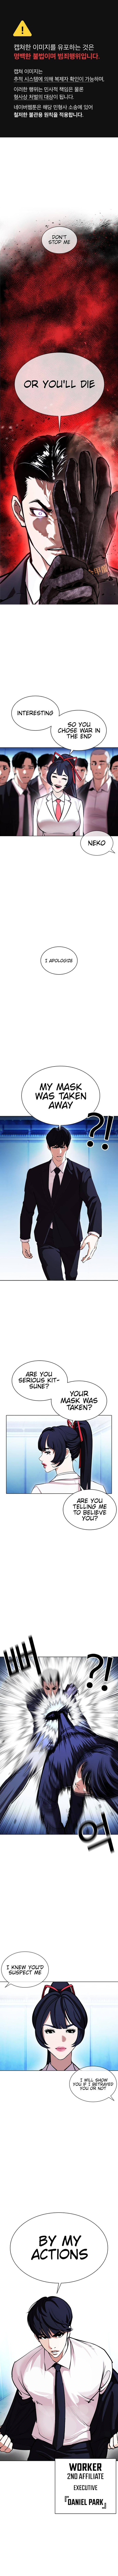 Lookism, Ch. 385 - Chapter 385 image 03